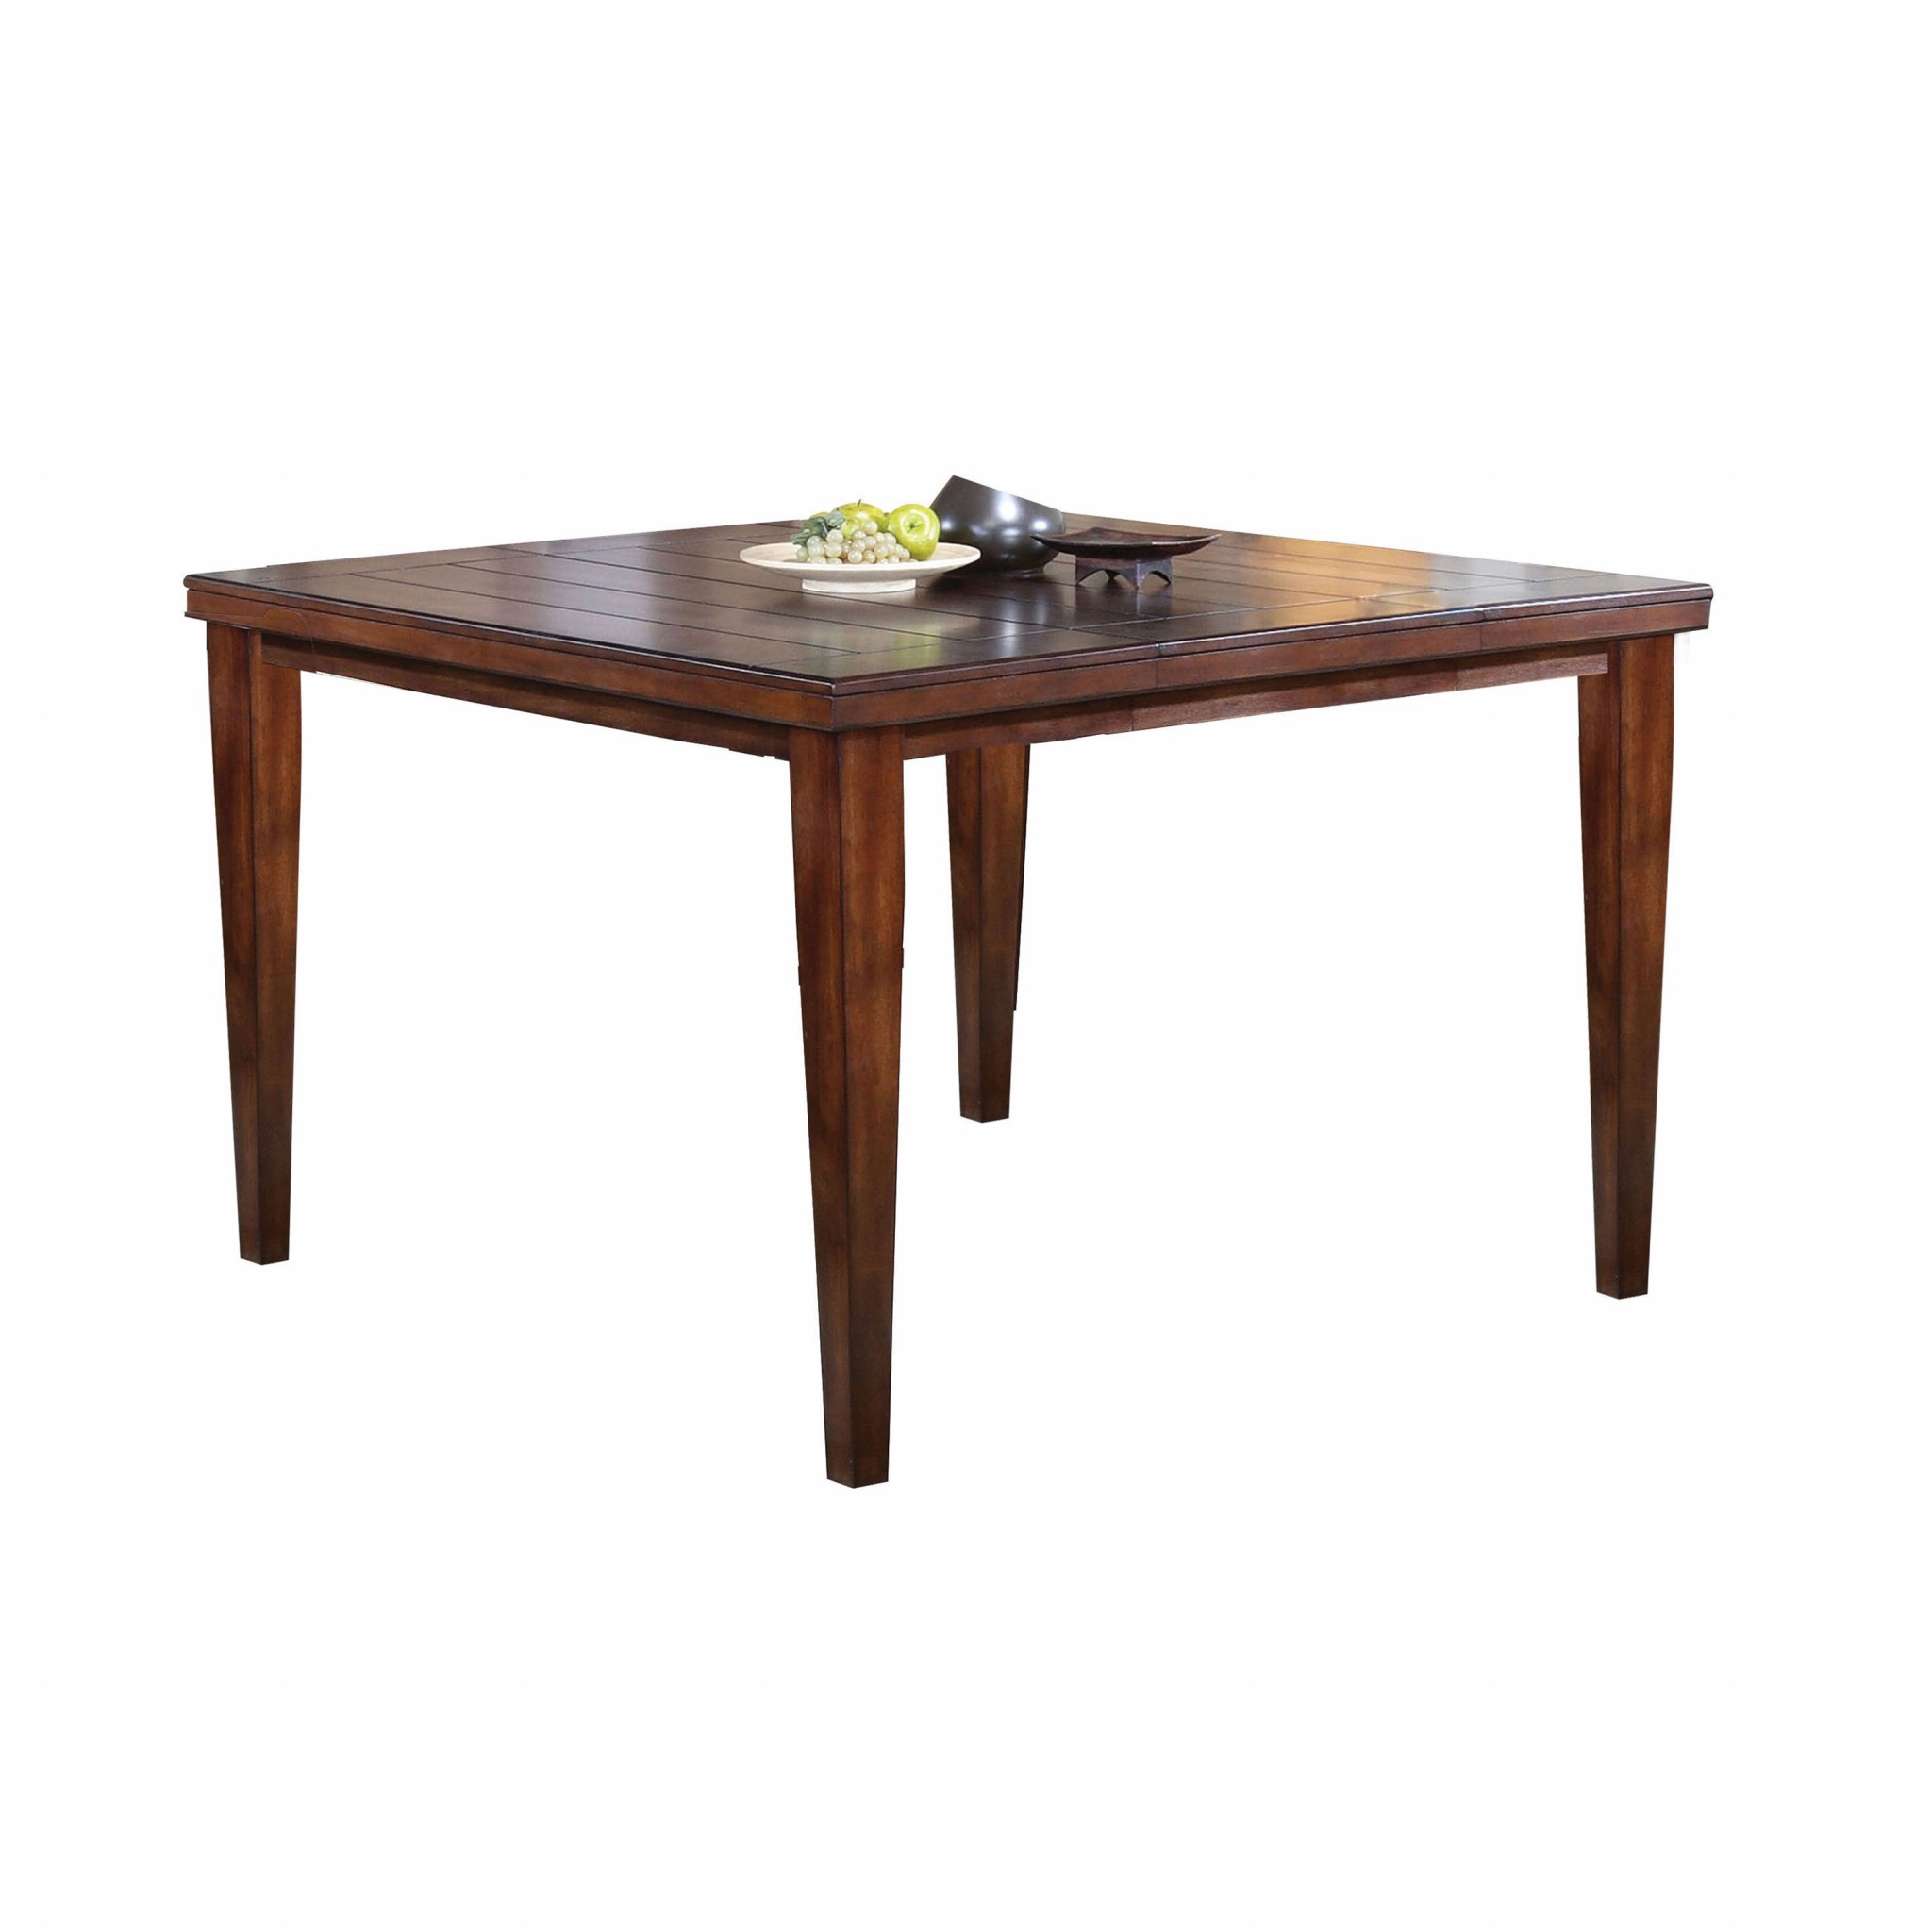 54" X 54" X 36" Cherry Wood Counter Height Table